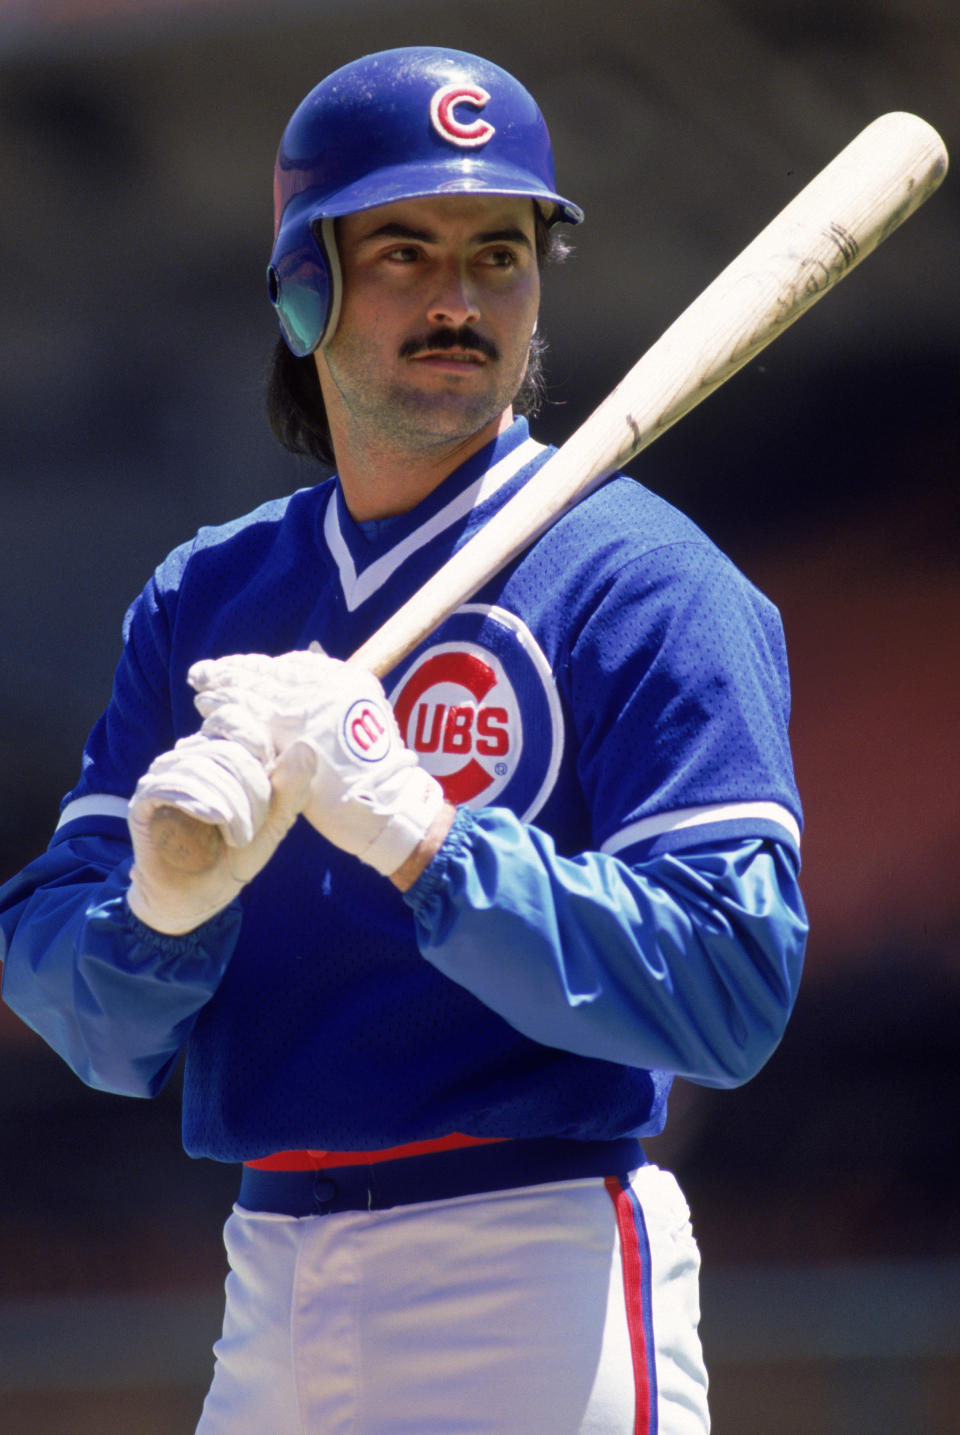 <b>Rafael Palmeiro</b><br> <br>Palmeiro could have been preparing for a special weekend in Cooperstown had he not been dumb enough to get caught with steroids after adamantly telling Congress the winter before that he had never used them. Alas, his most memorable highlight will always be stubbornly lying to Congress, which reduced his total of 569 career homers to nothing but an afterthought. Even if you wanted to give him the benefit of the doubt as a stats compiler in an era of offense, it's awfully hard to get past that sound byte. – KK <br> <br><i>BLS vote: No<br> Will he get in this year: No<br> BBTF projection: N/A</i><br> <br>(Getty Images)